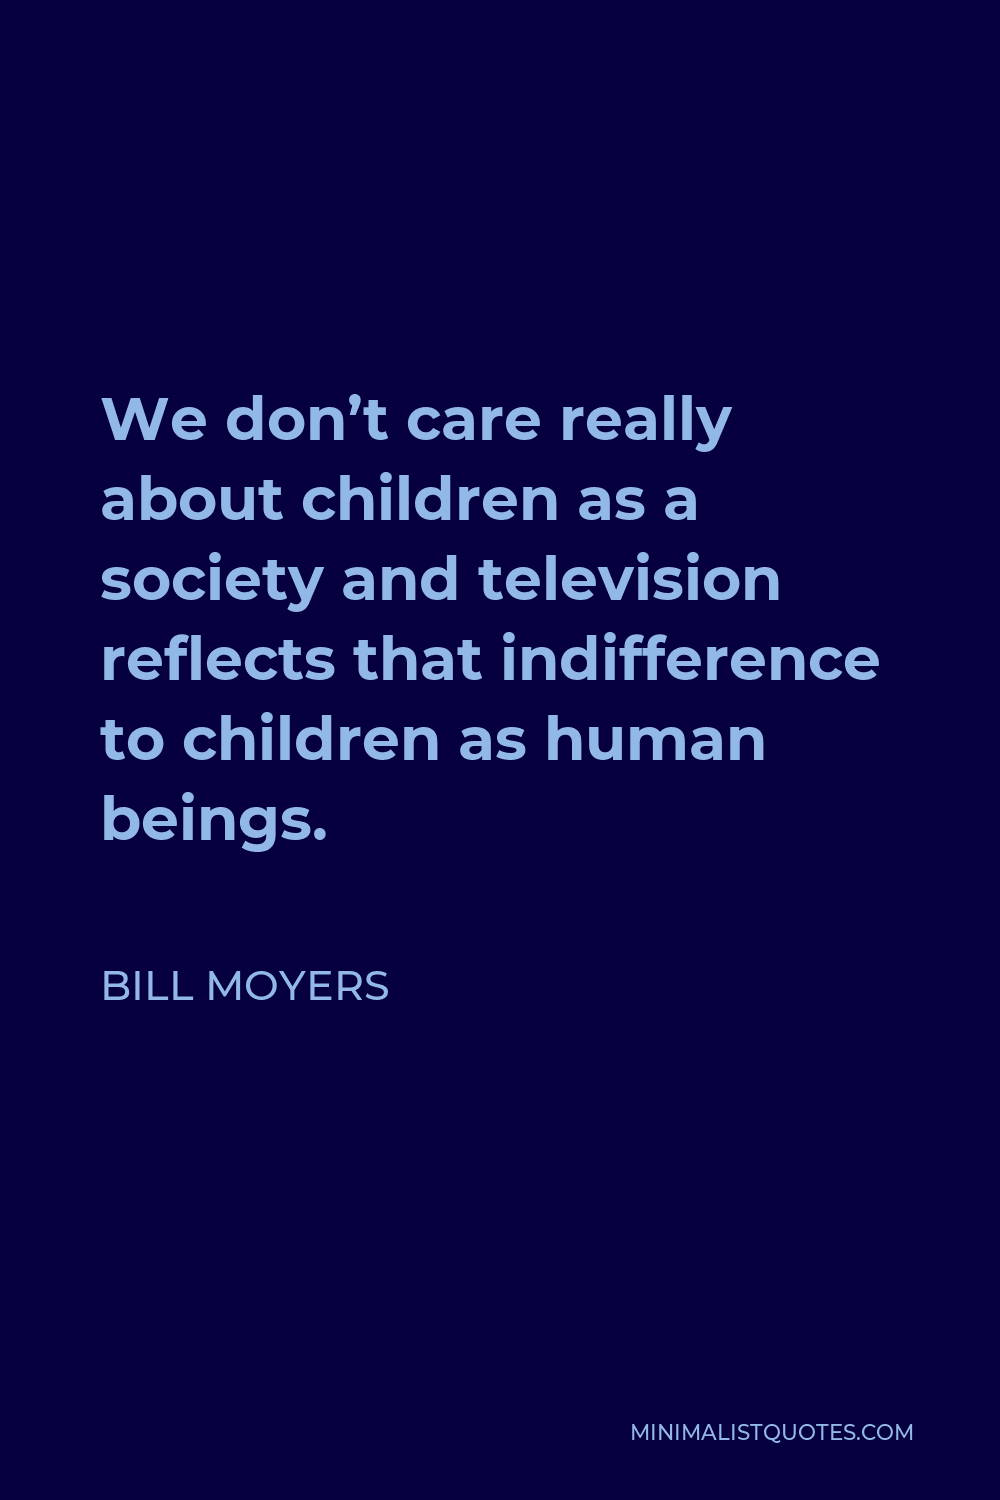 Bill Moyers Quote - We don’t care really about children as a society and television reflects that indifference to children as human beings.